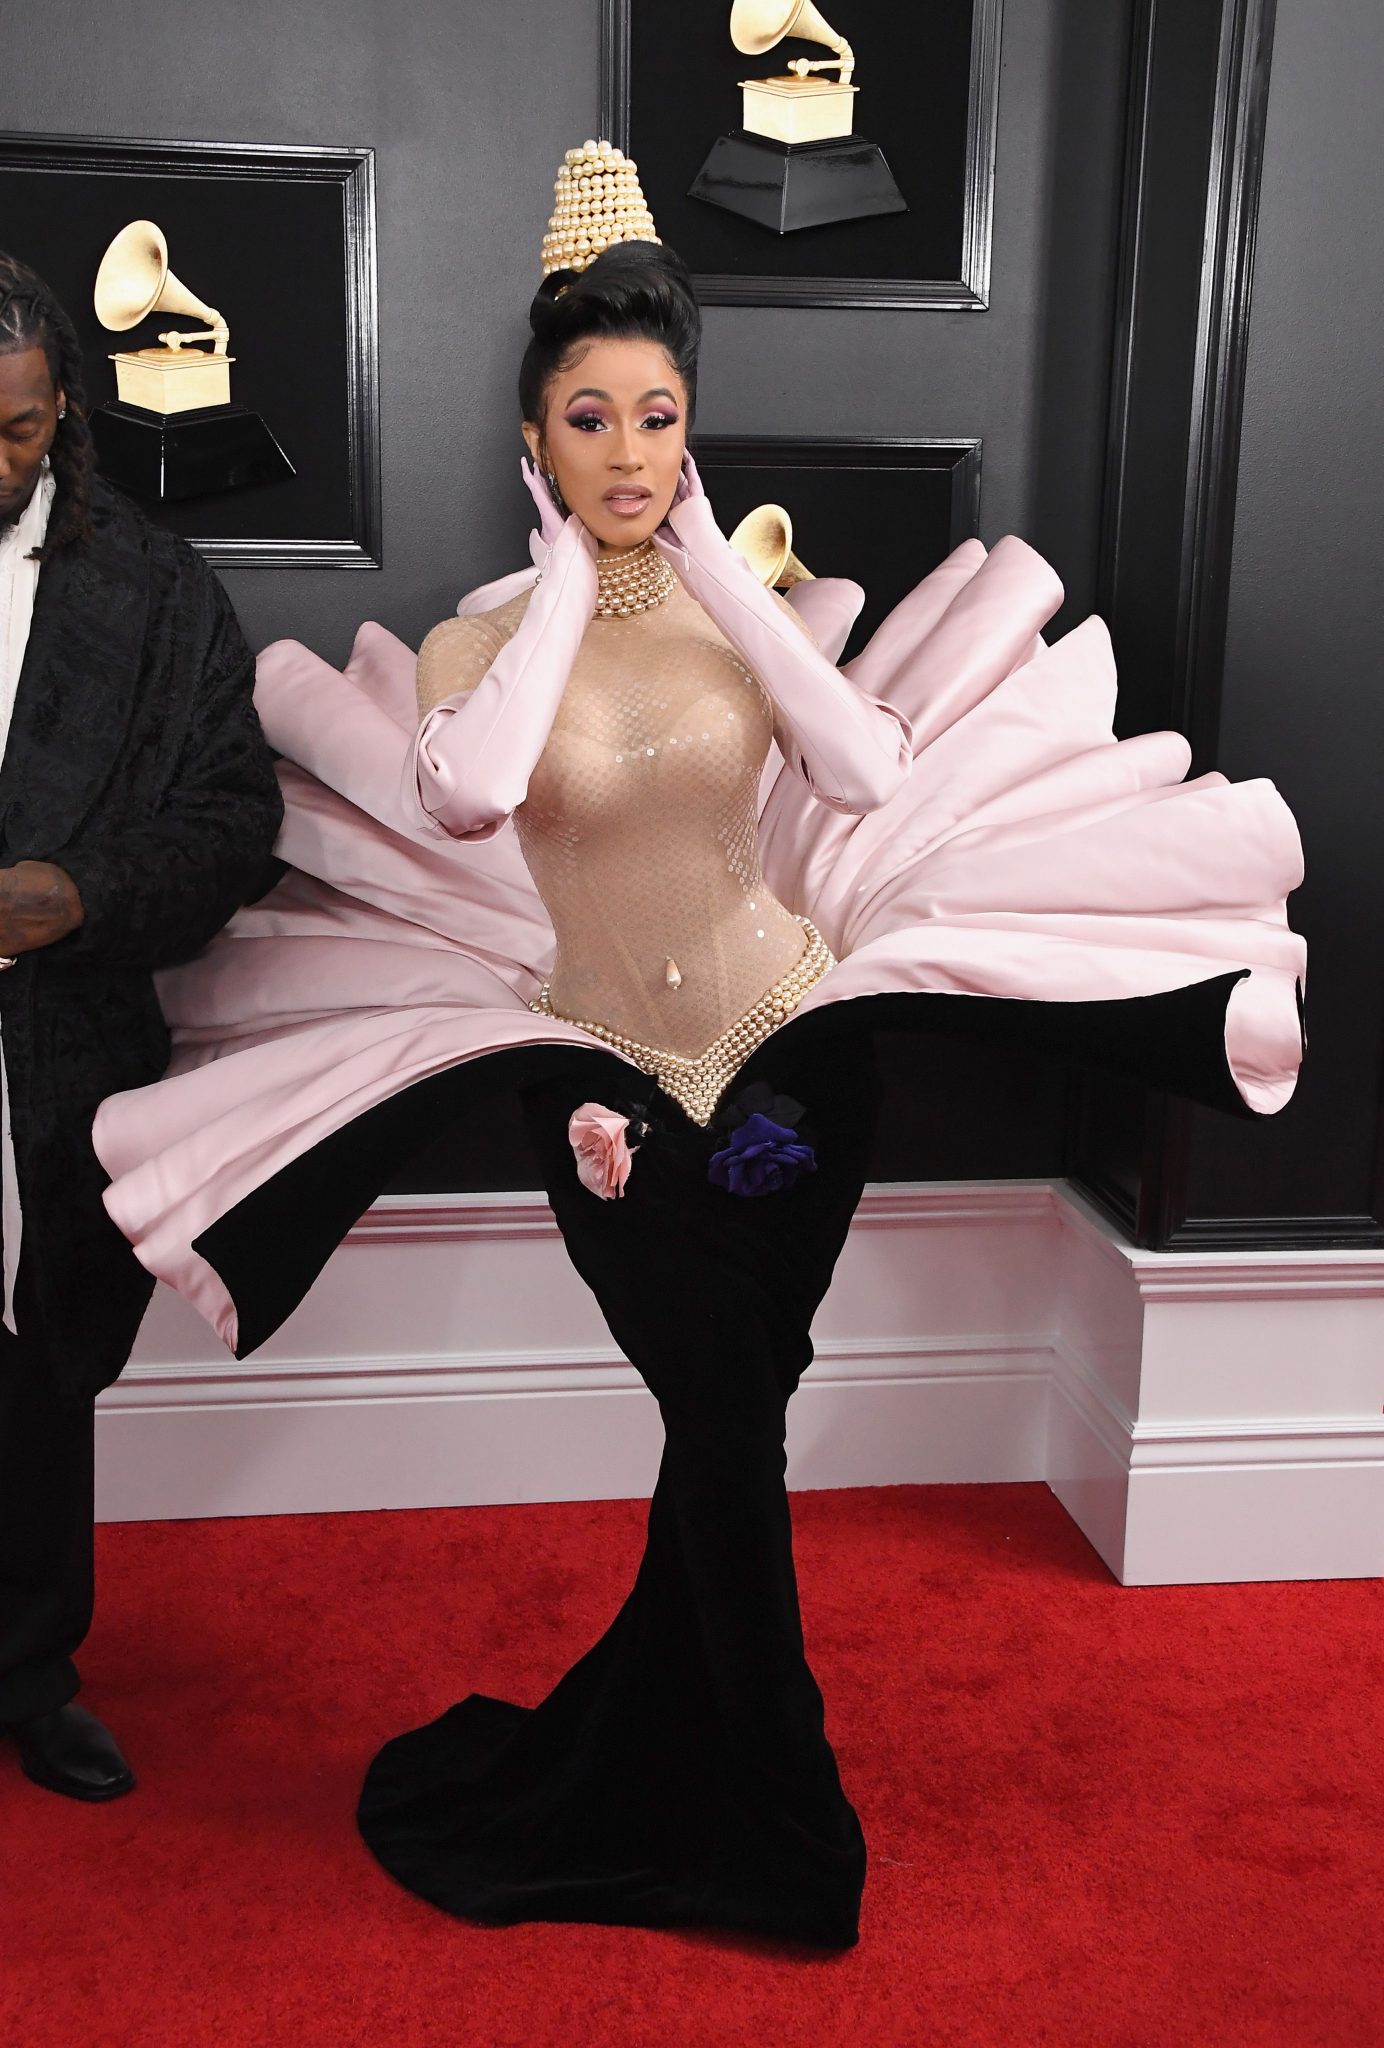 the grammys red carpet was full of surprises